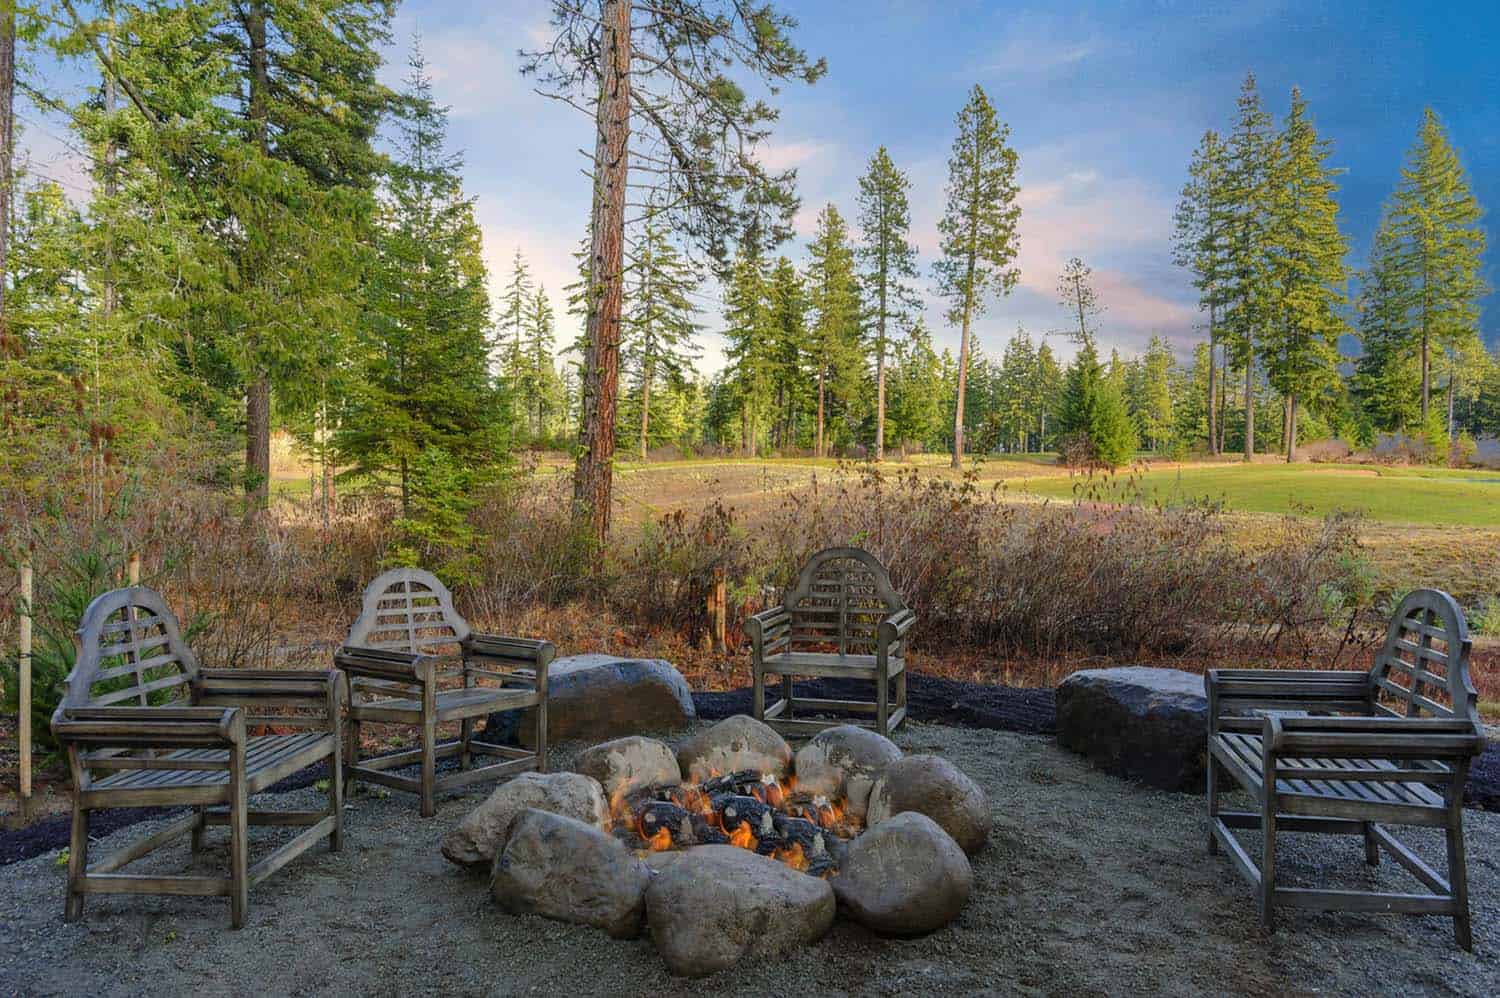 28 Inspiring Fire Pit Ideas To Create A, Natural Stone Fire Pit